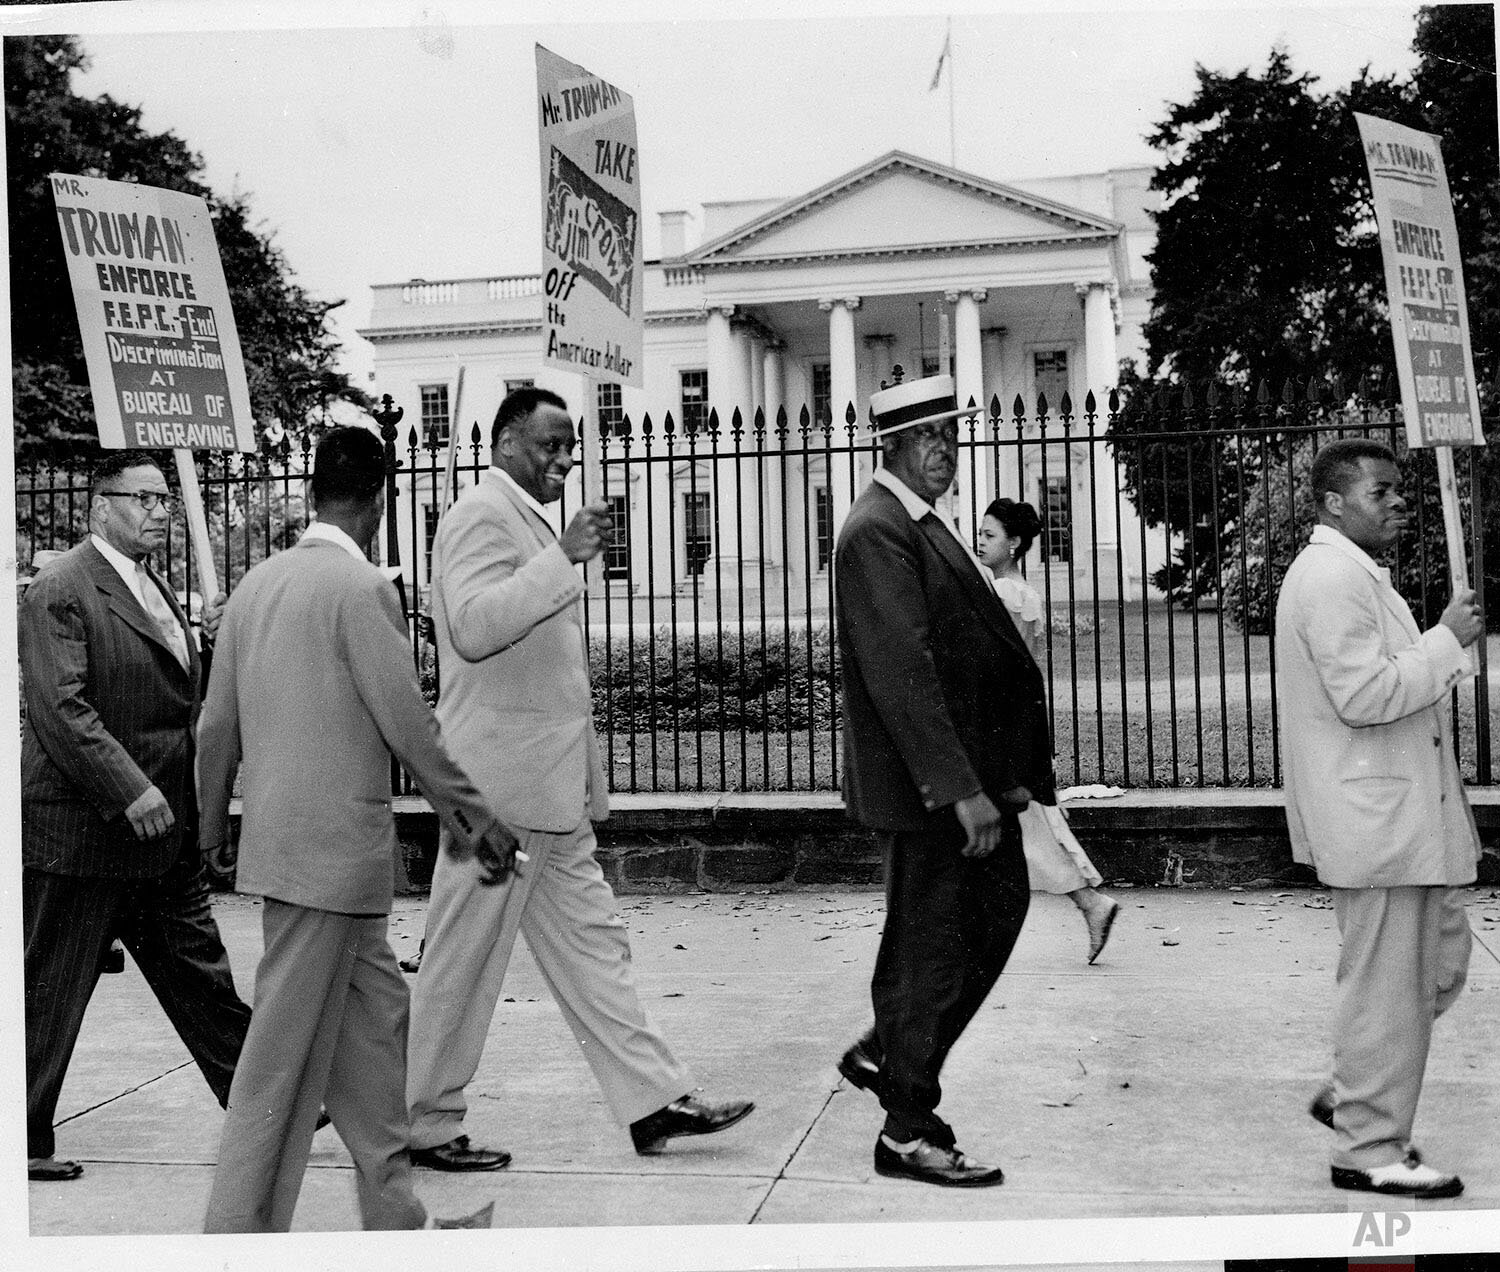  Singer Paul Robeson, third from left, pickets with others in front of the White House, Aug. 4, 1949, calling on Pres. Truman to "end discrimination at the Bureau of Engraving." (AP Photo/Henry Burroughs) 